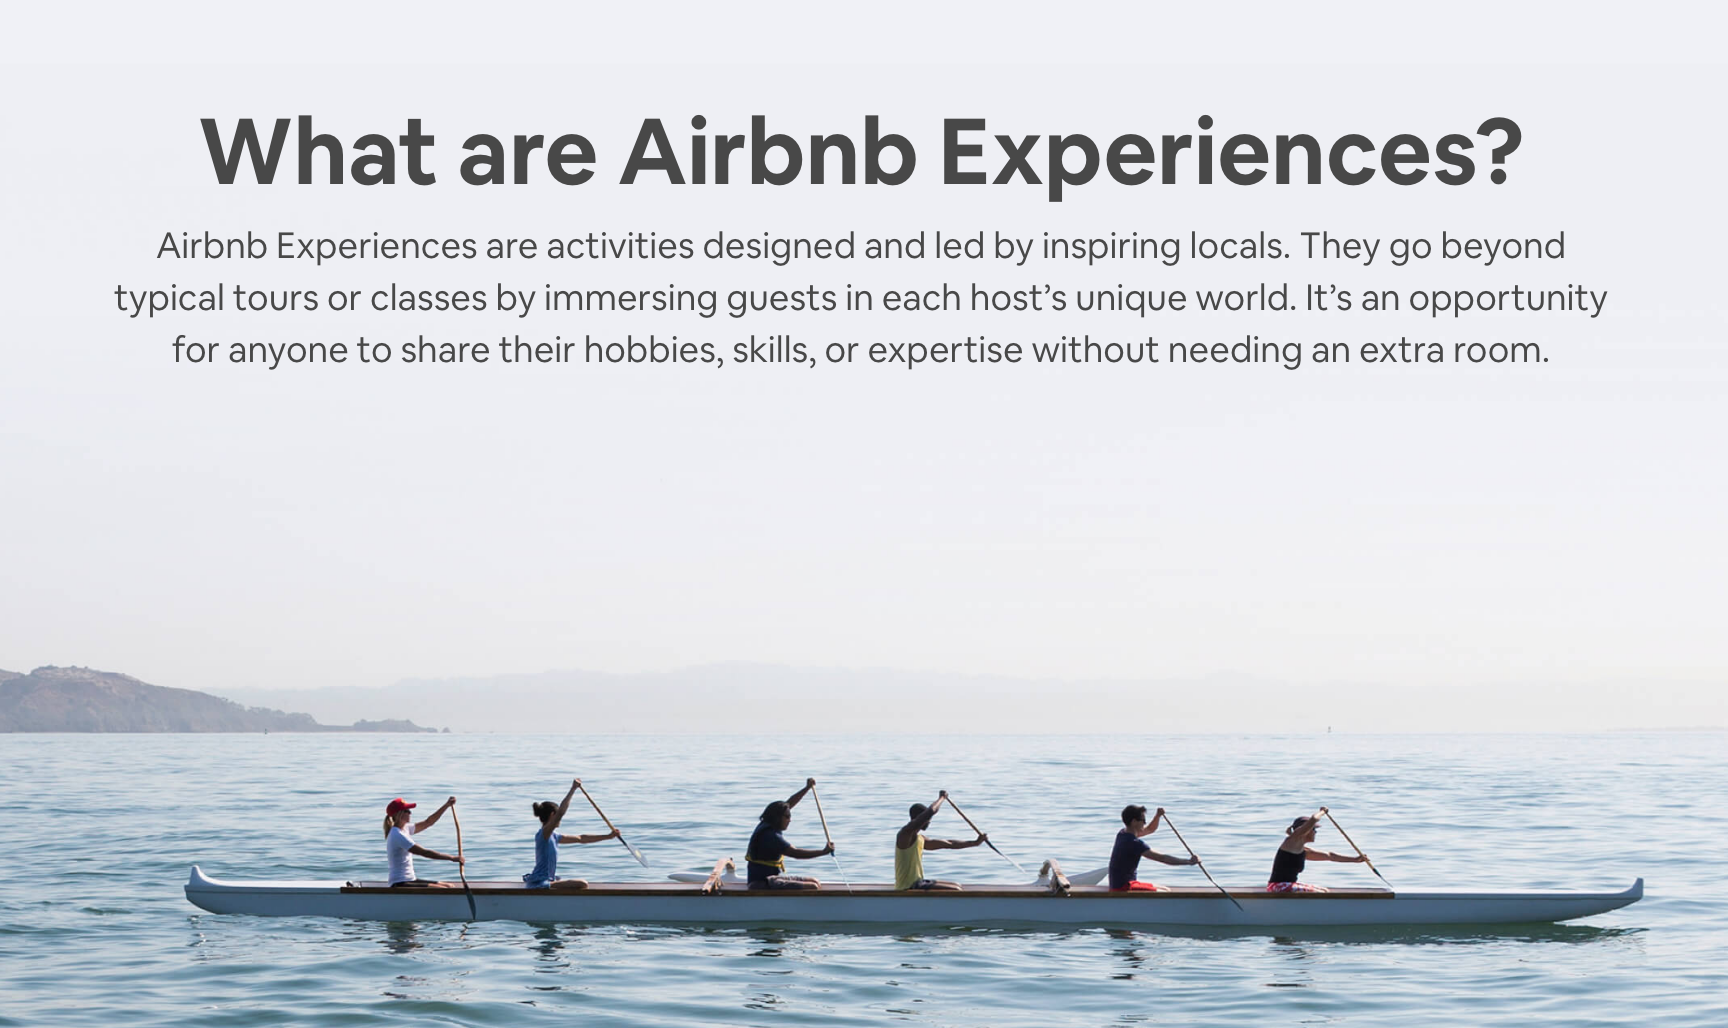 airbnb experiences near me